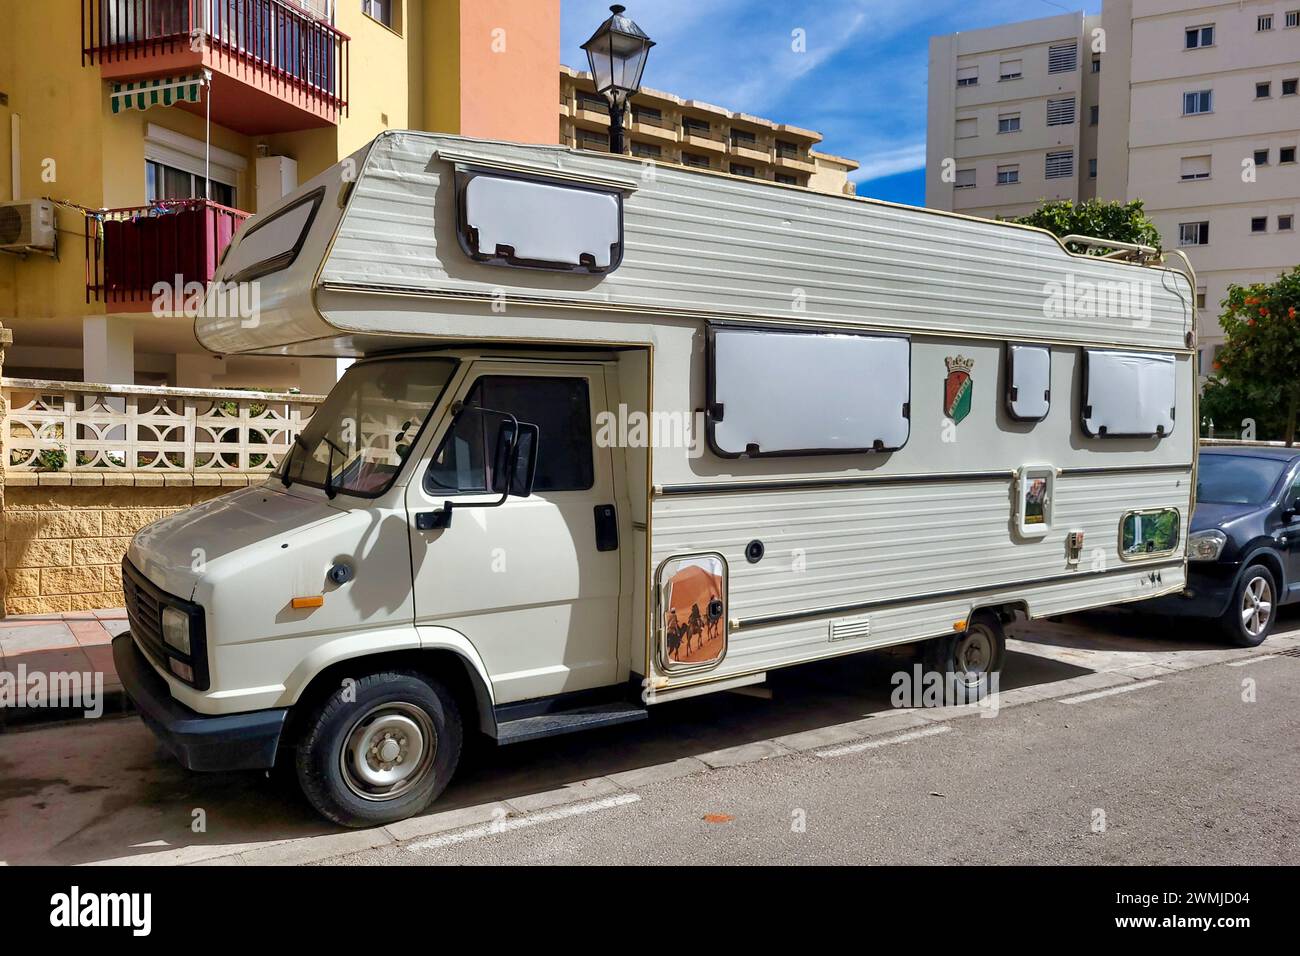 Old Peugeot motorhome parked on a street in Fuengirola, Málaga, Spain. Stock Photo